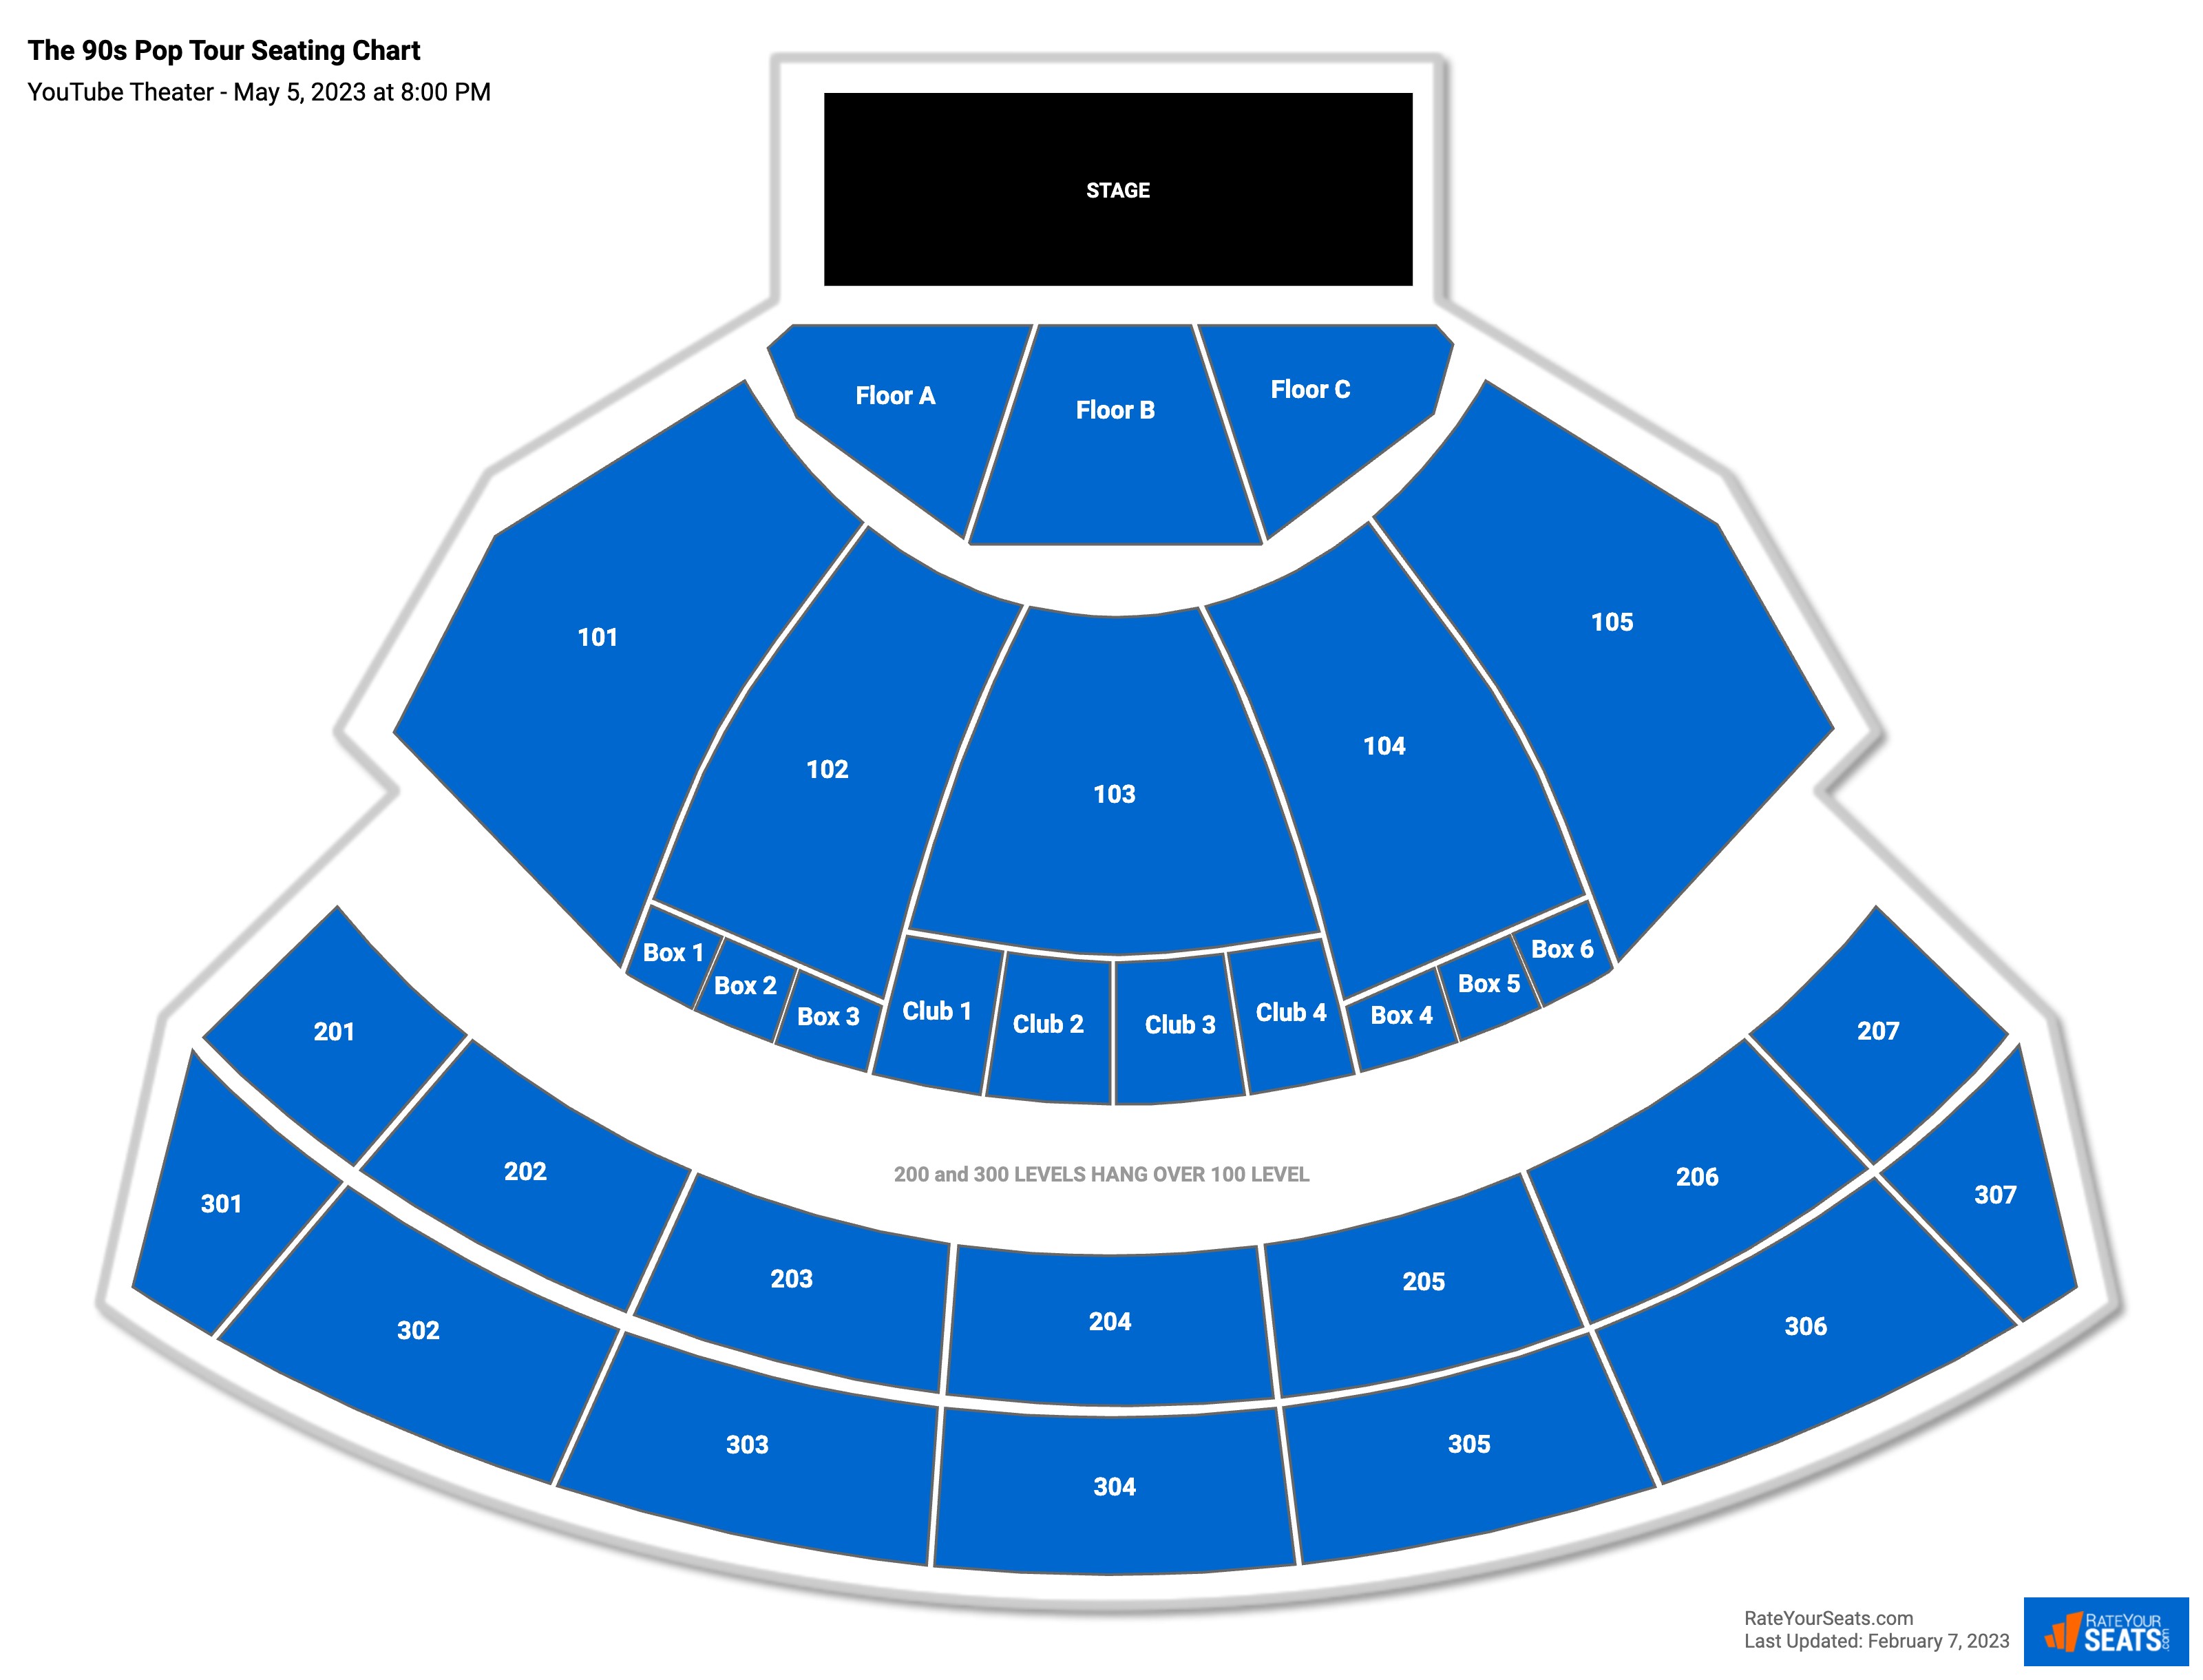 YouTube Theater Seating Chart